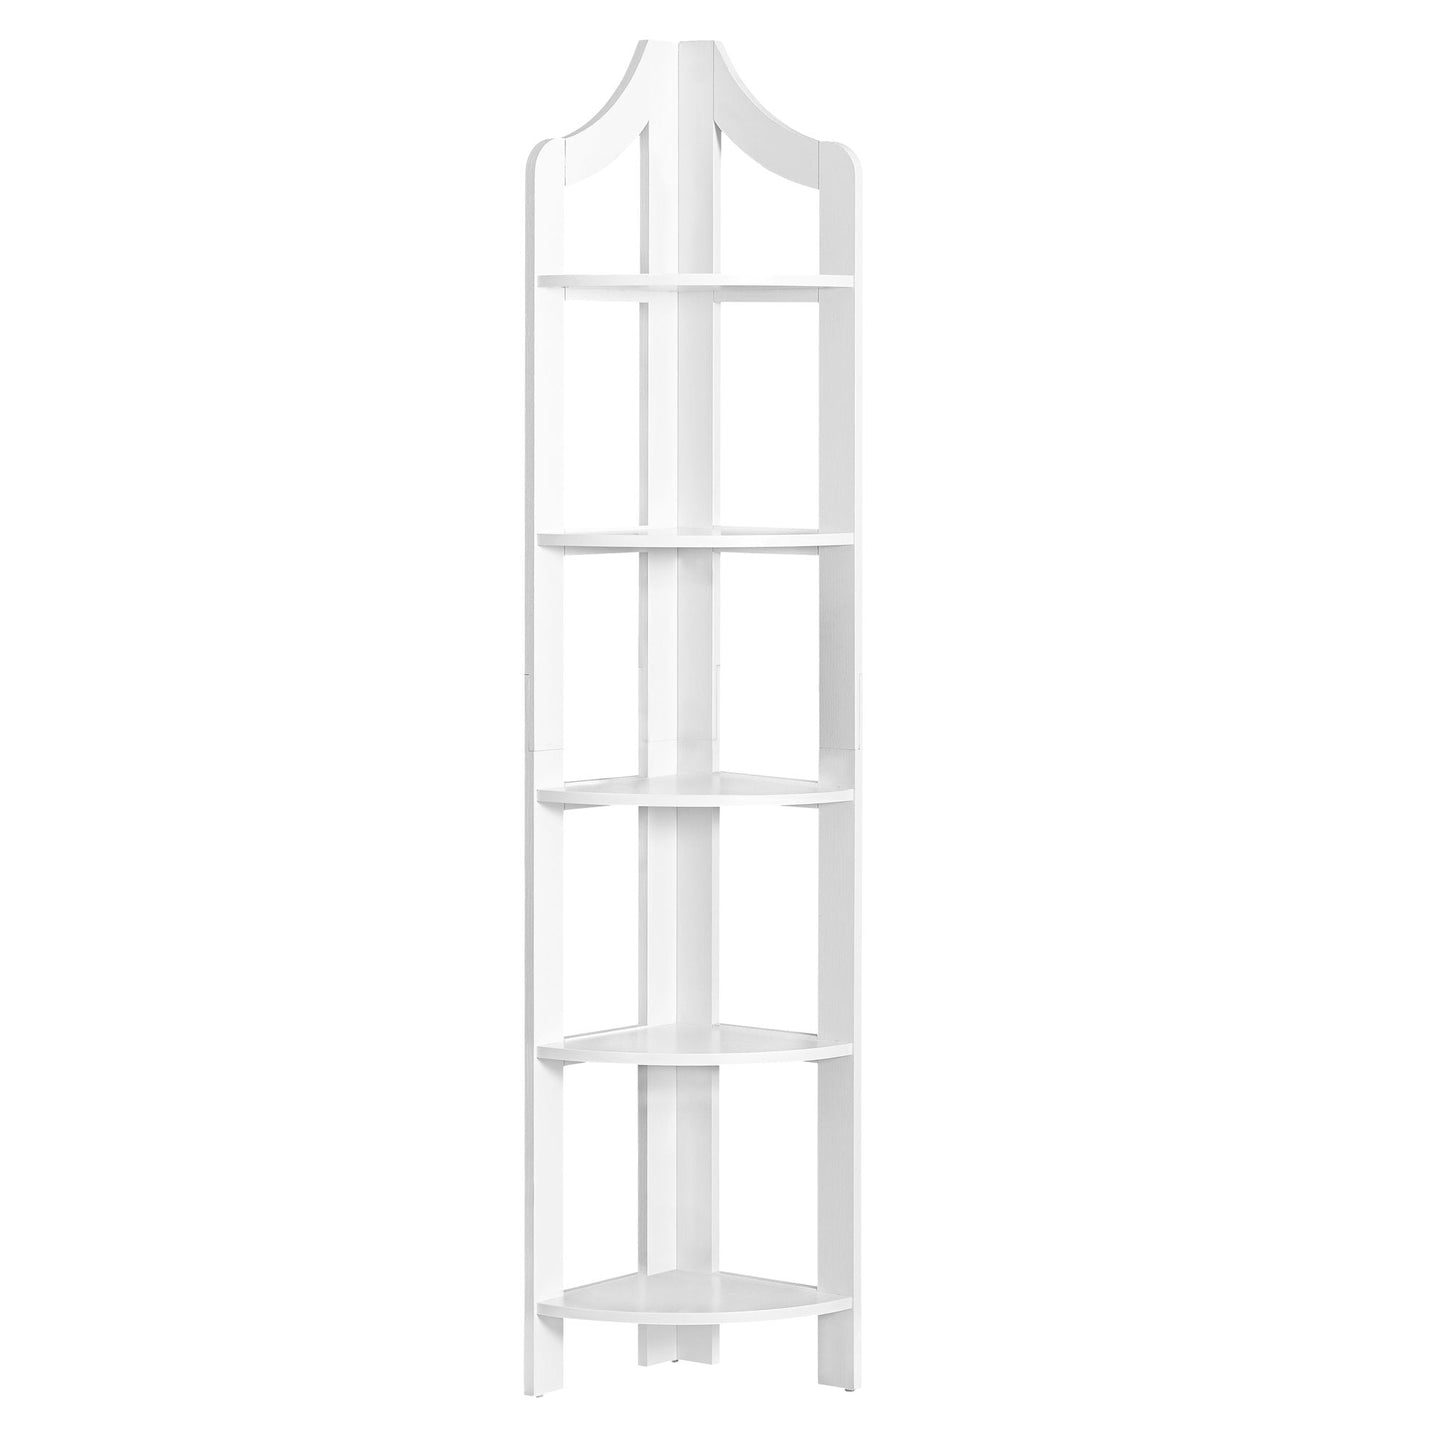 72"H 5-Tier 5 Shelf French Etagere White Laminate Bedroom Bookcase